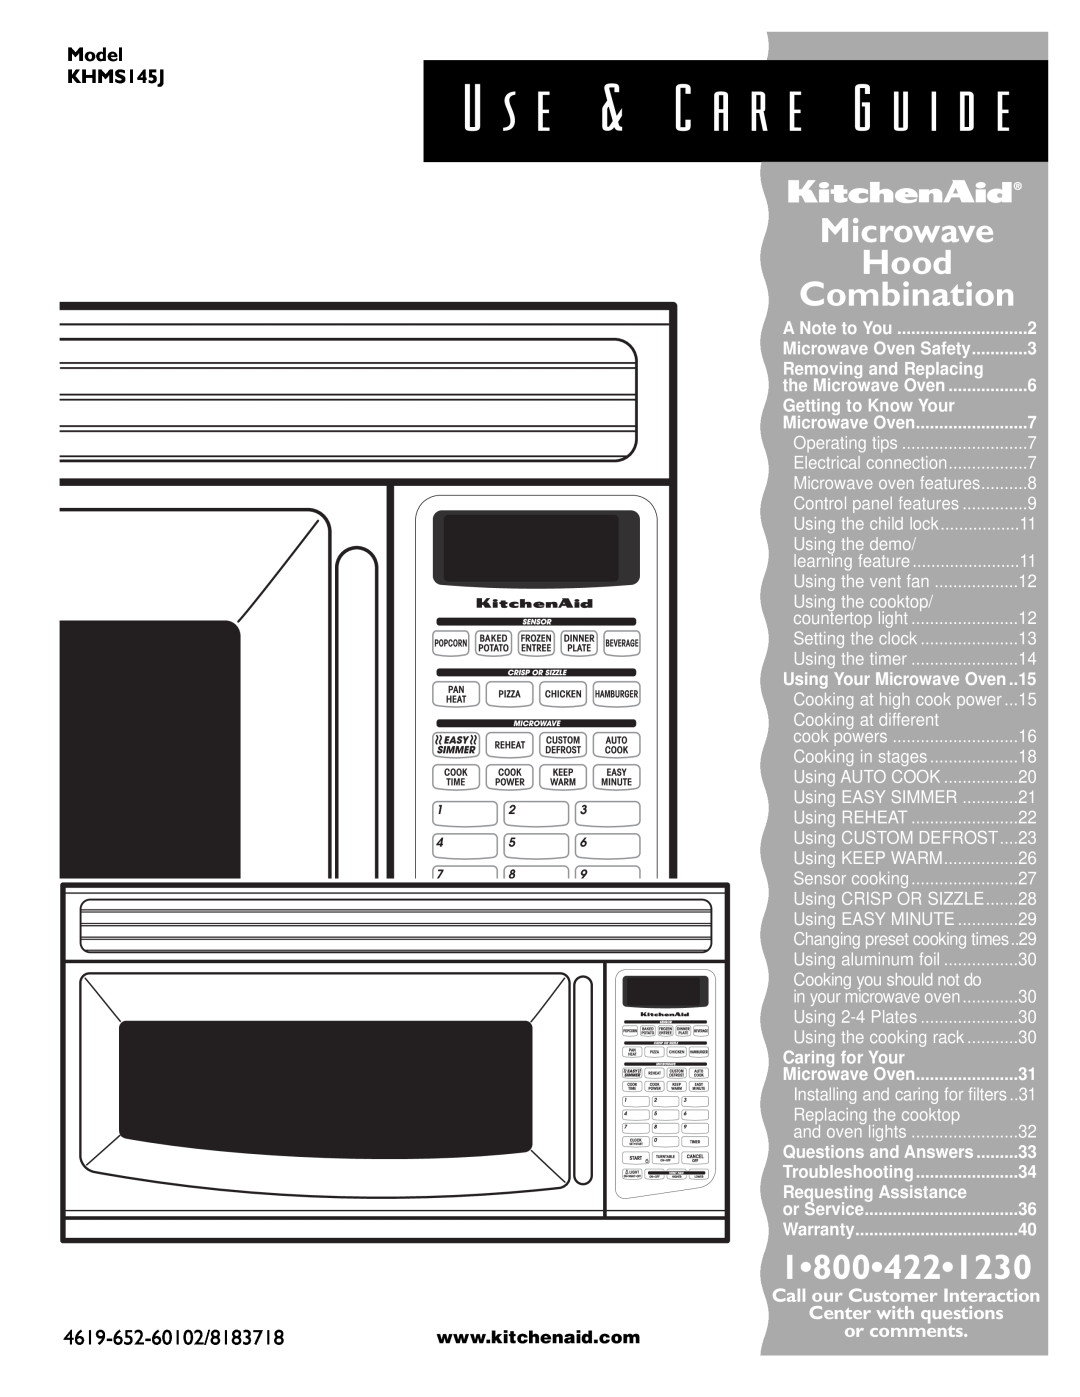 KitchenAid warranty Model KHMS145J, Call our Customer Interaction Center with questions or comments, 18004221230 